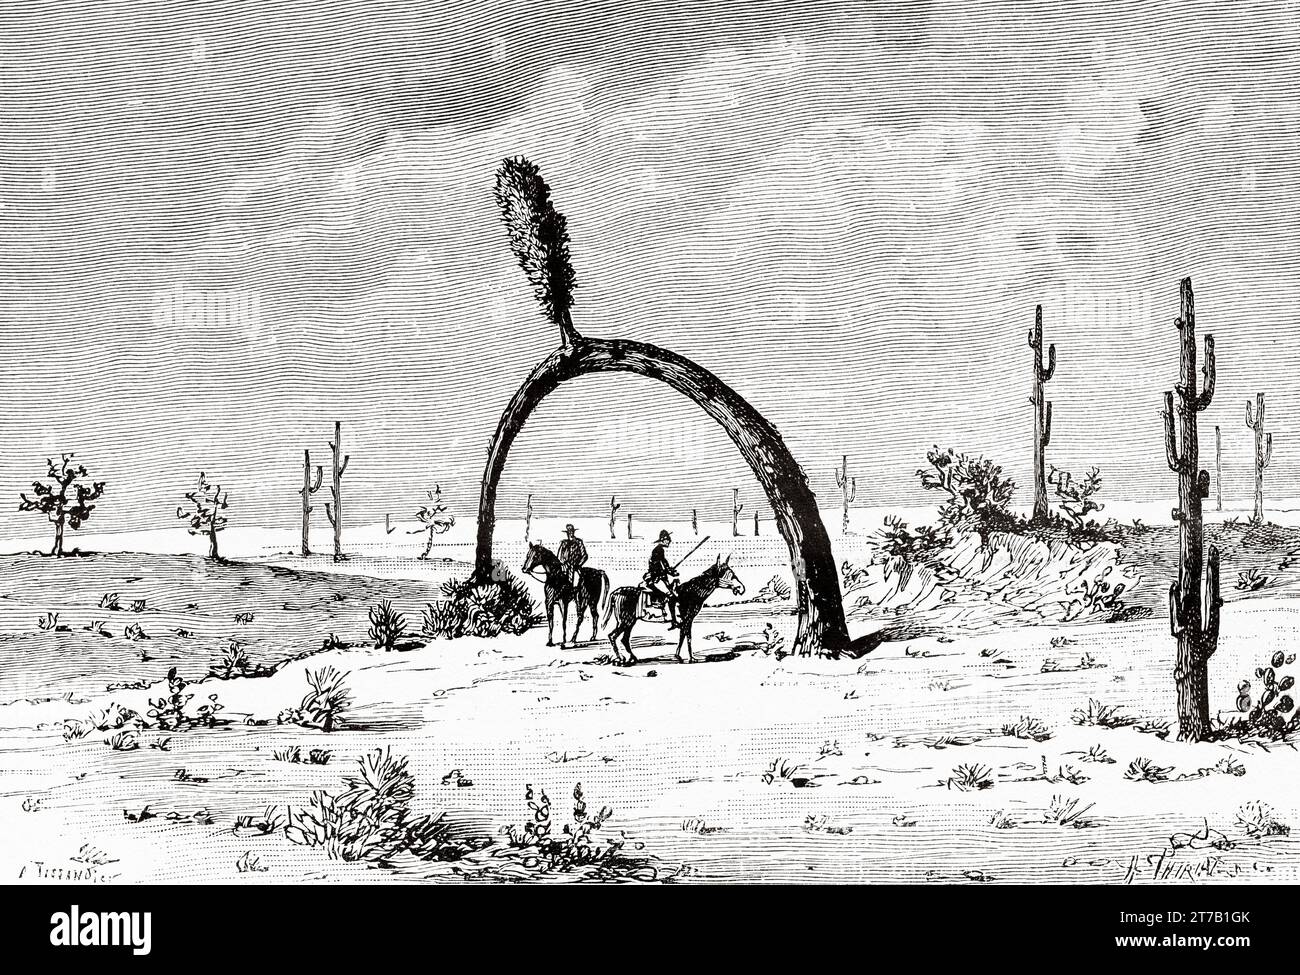 Giant Yucca at Mojave Desert, California, USA. Old illustration by Tissandier from La Nature 1887 Stock Photo